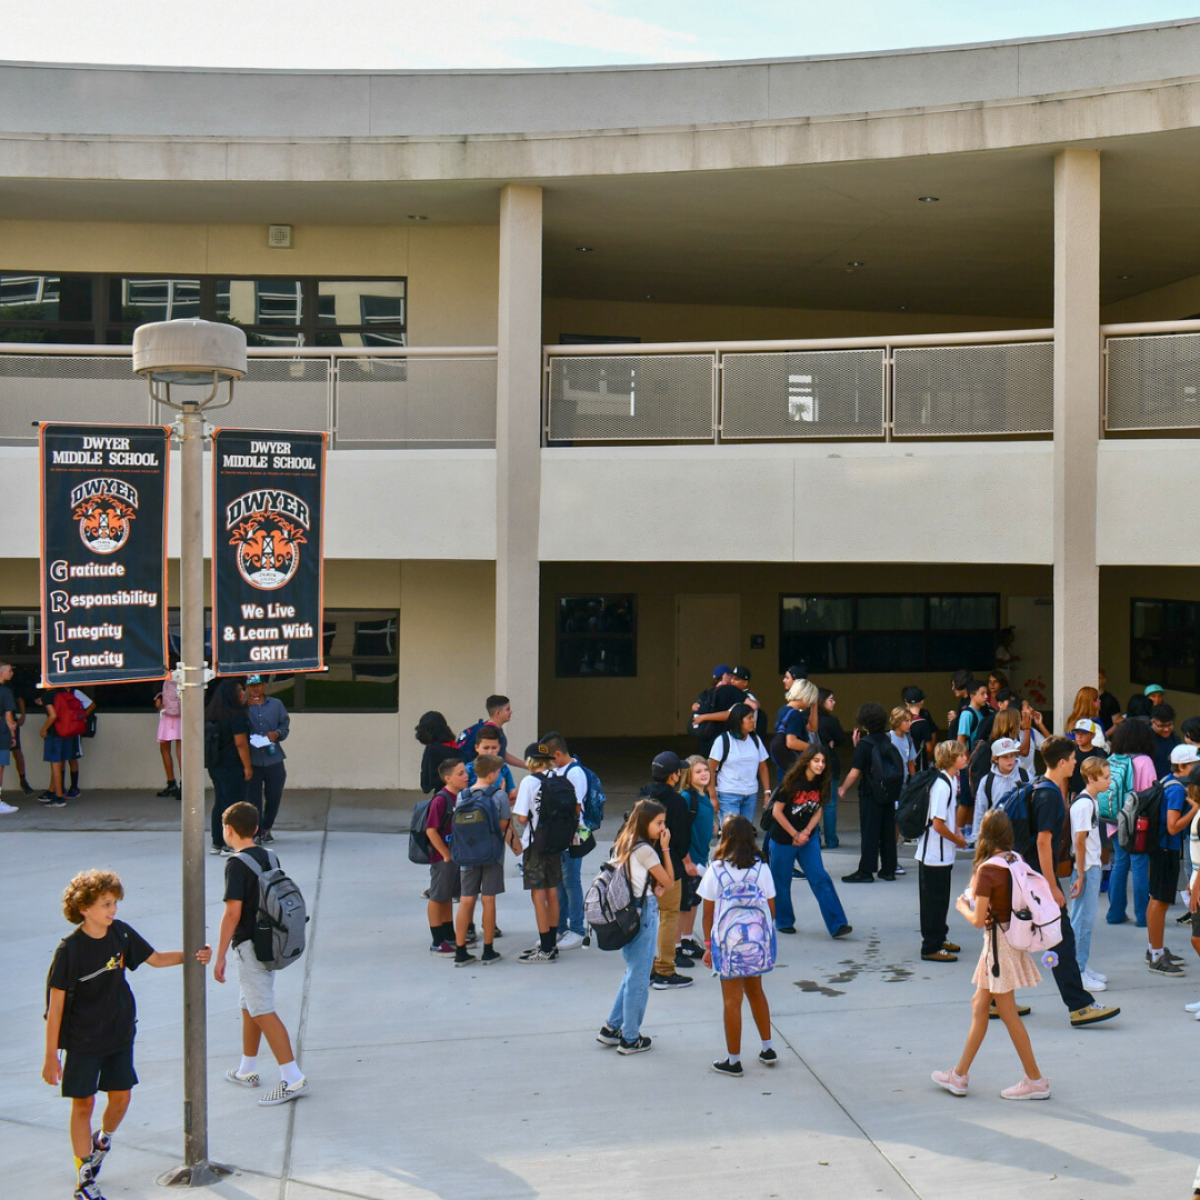 Students gather in the courtyard at Dwyer Middle School in Huntington Beach